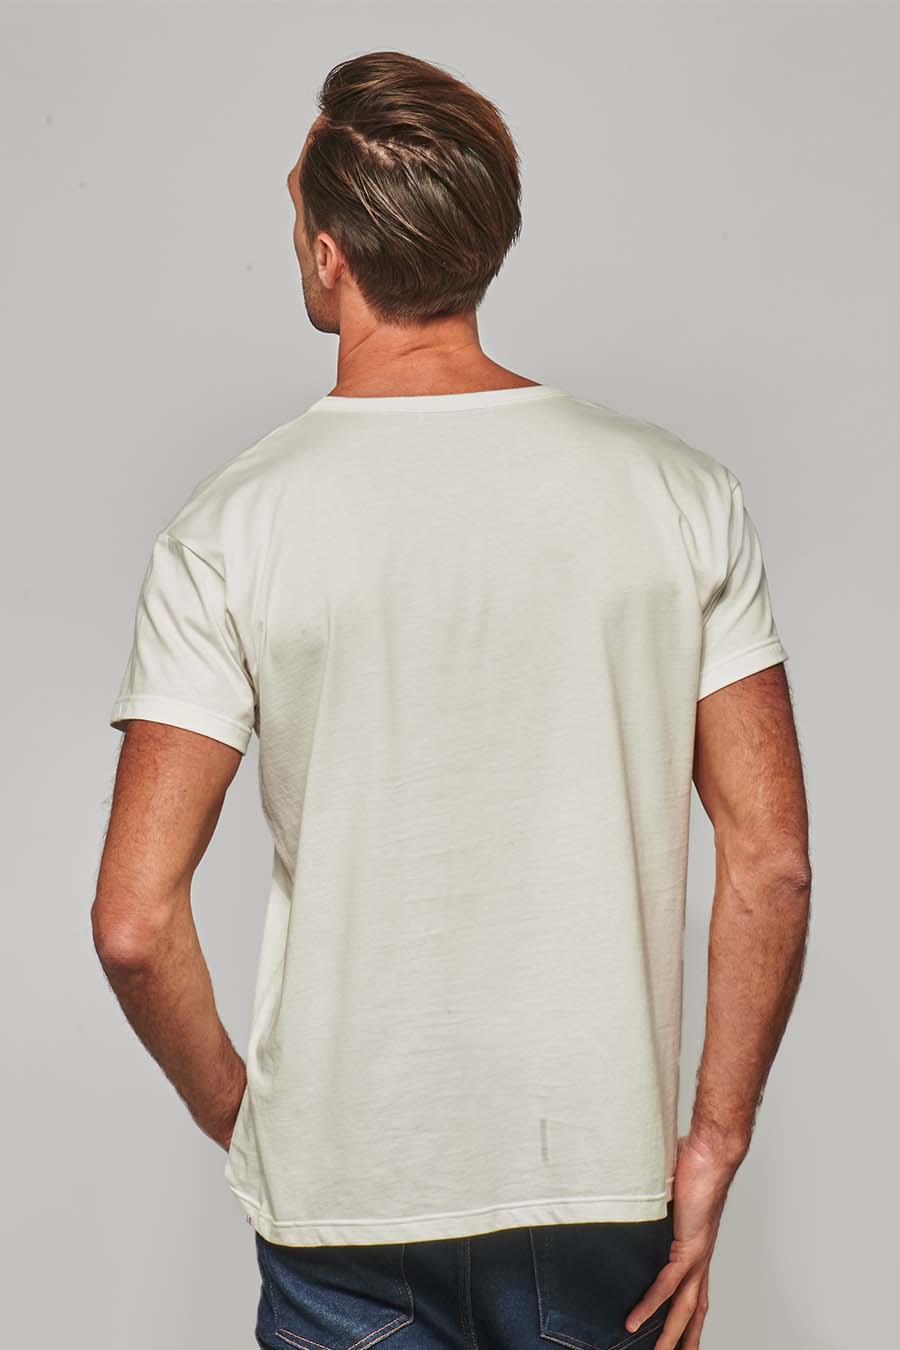 T-shirt homme classique made in France blanc - FIL ROUGE